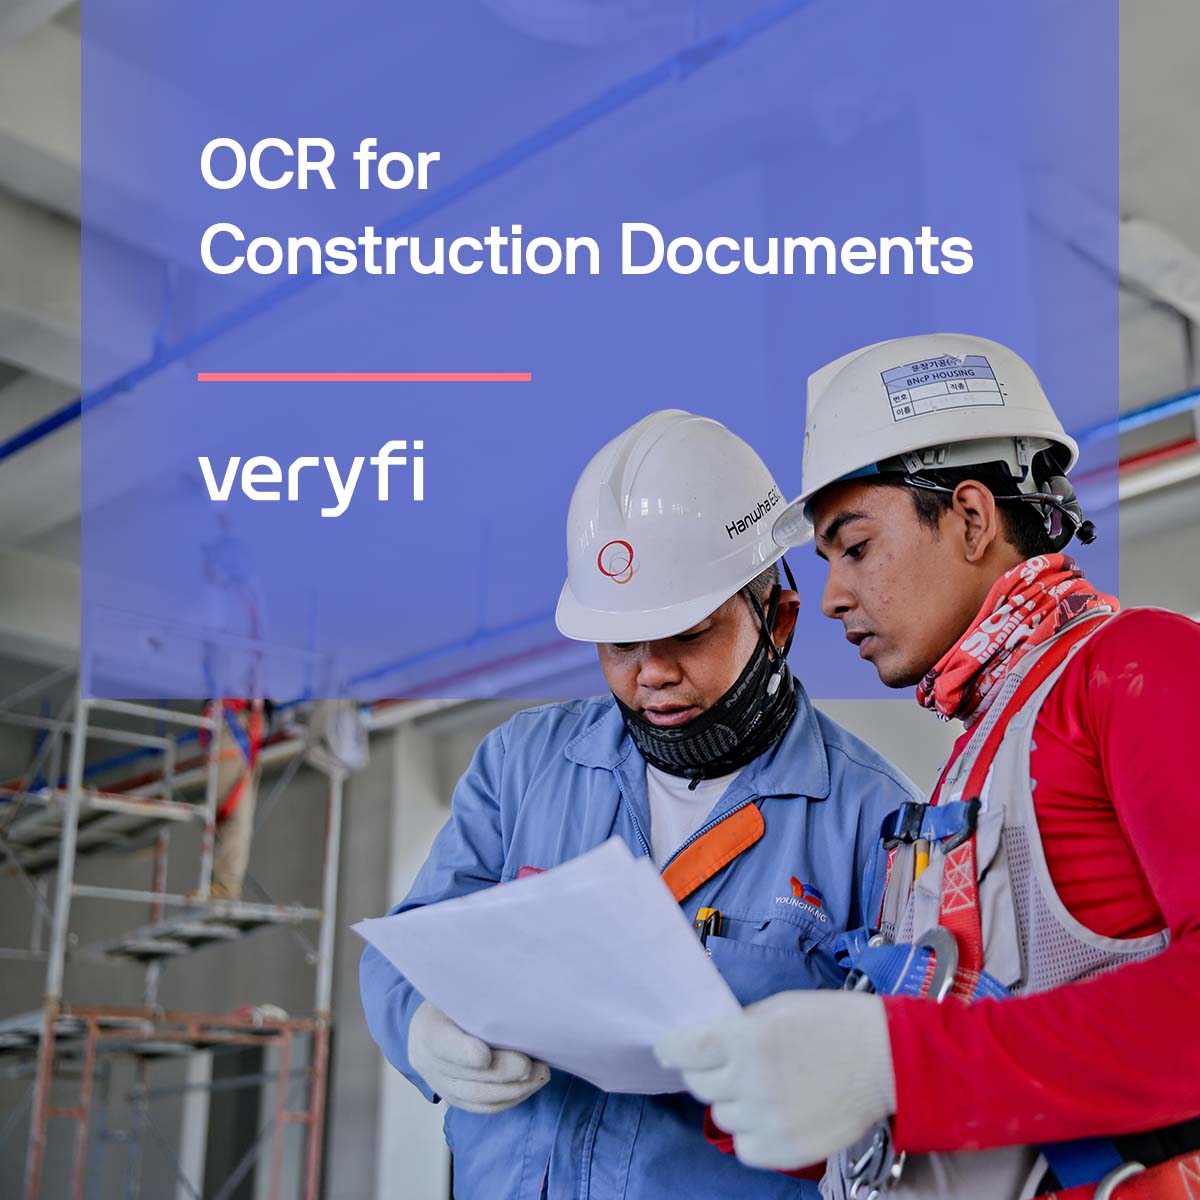 OCR for Construction Documents